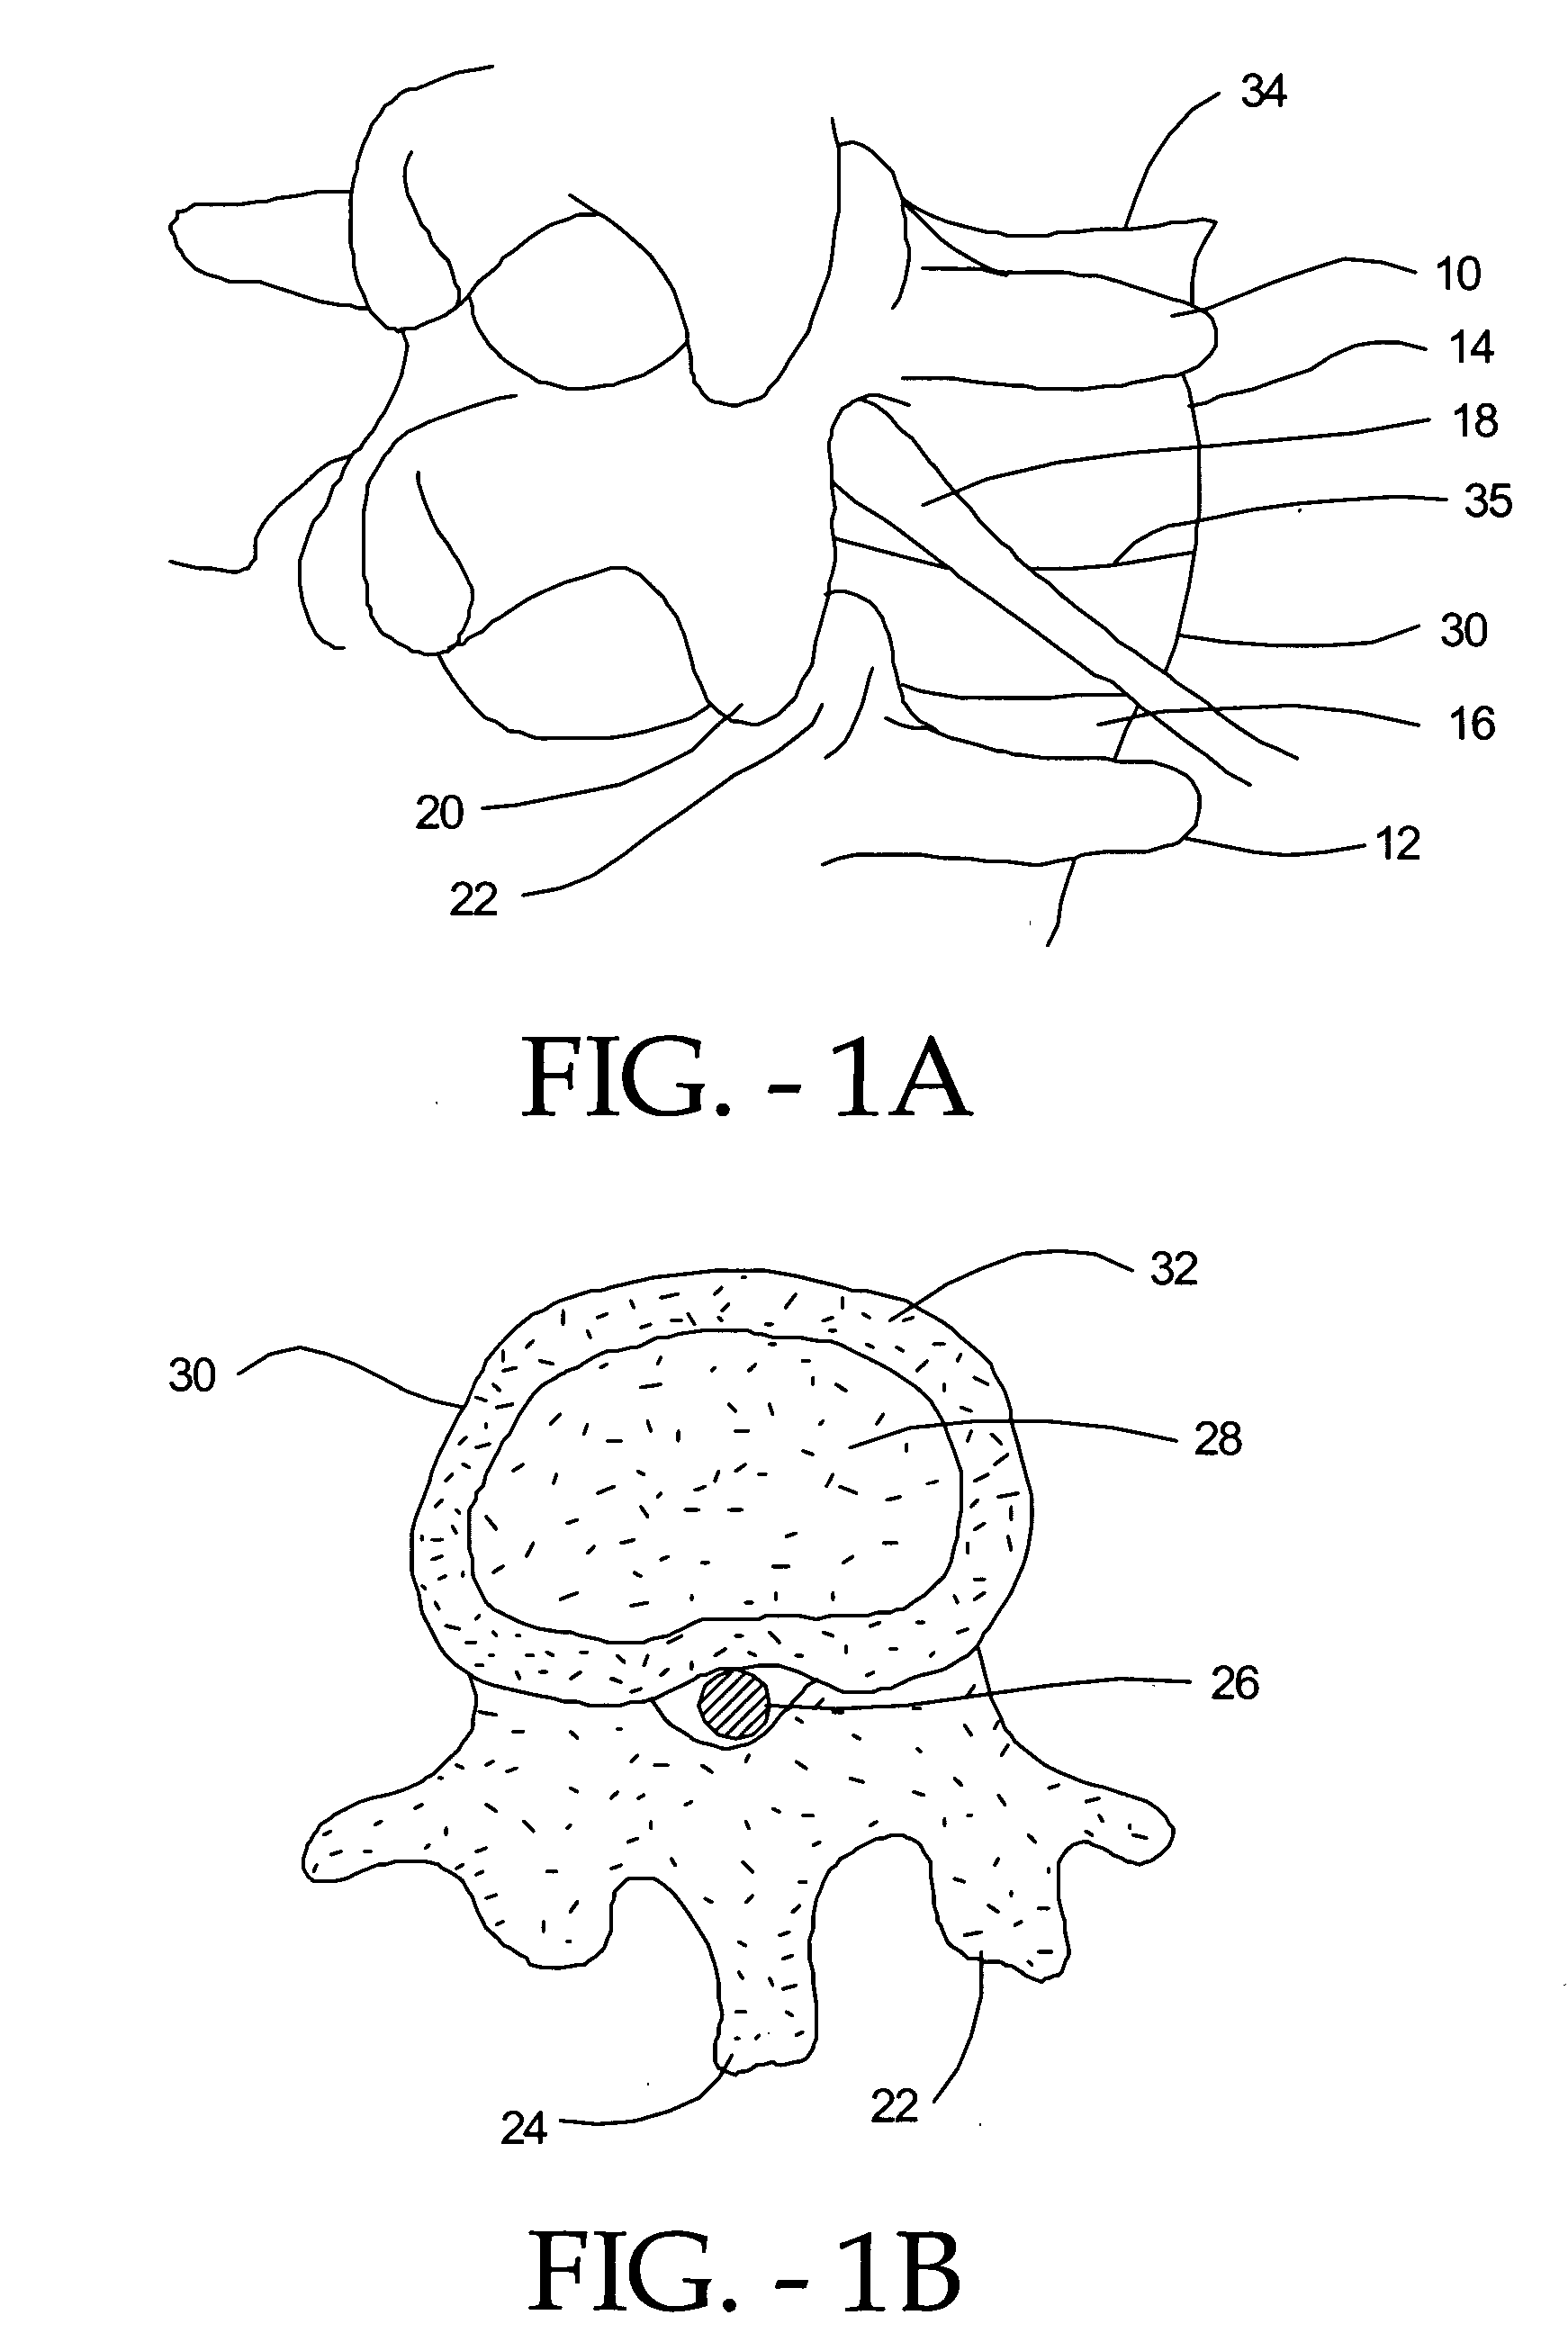 Posterior approach implant method for assembly of multi-piece artificial spinal disk replacement device in situ